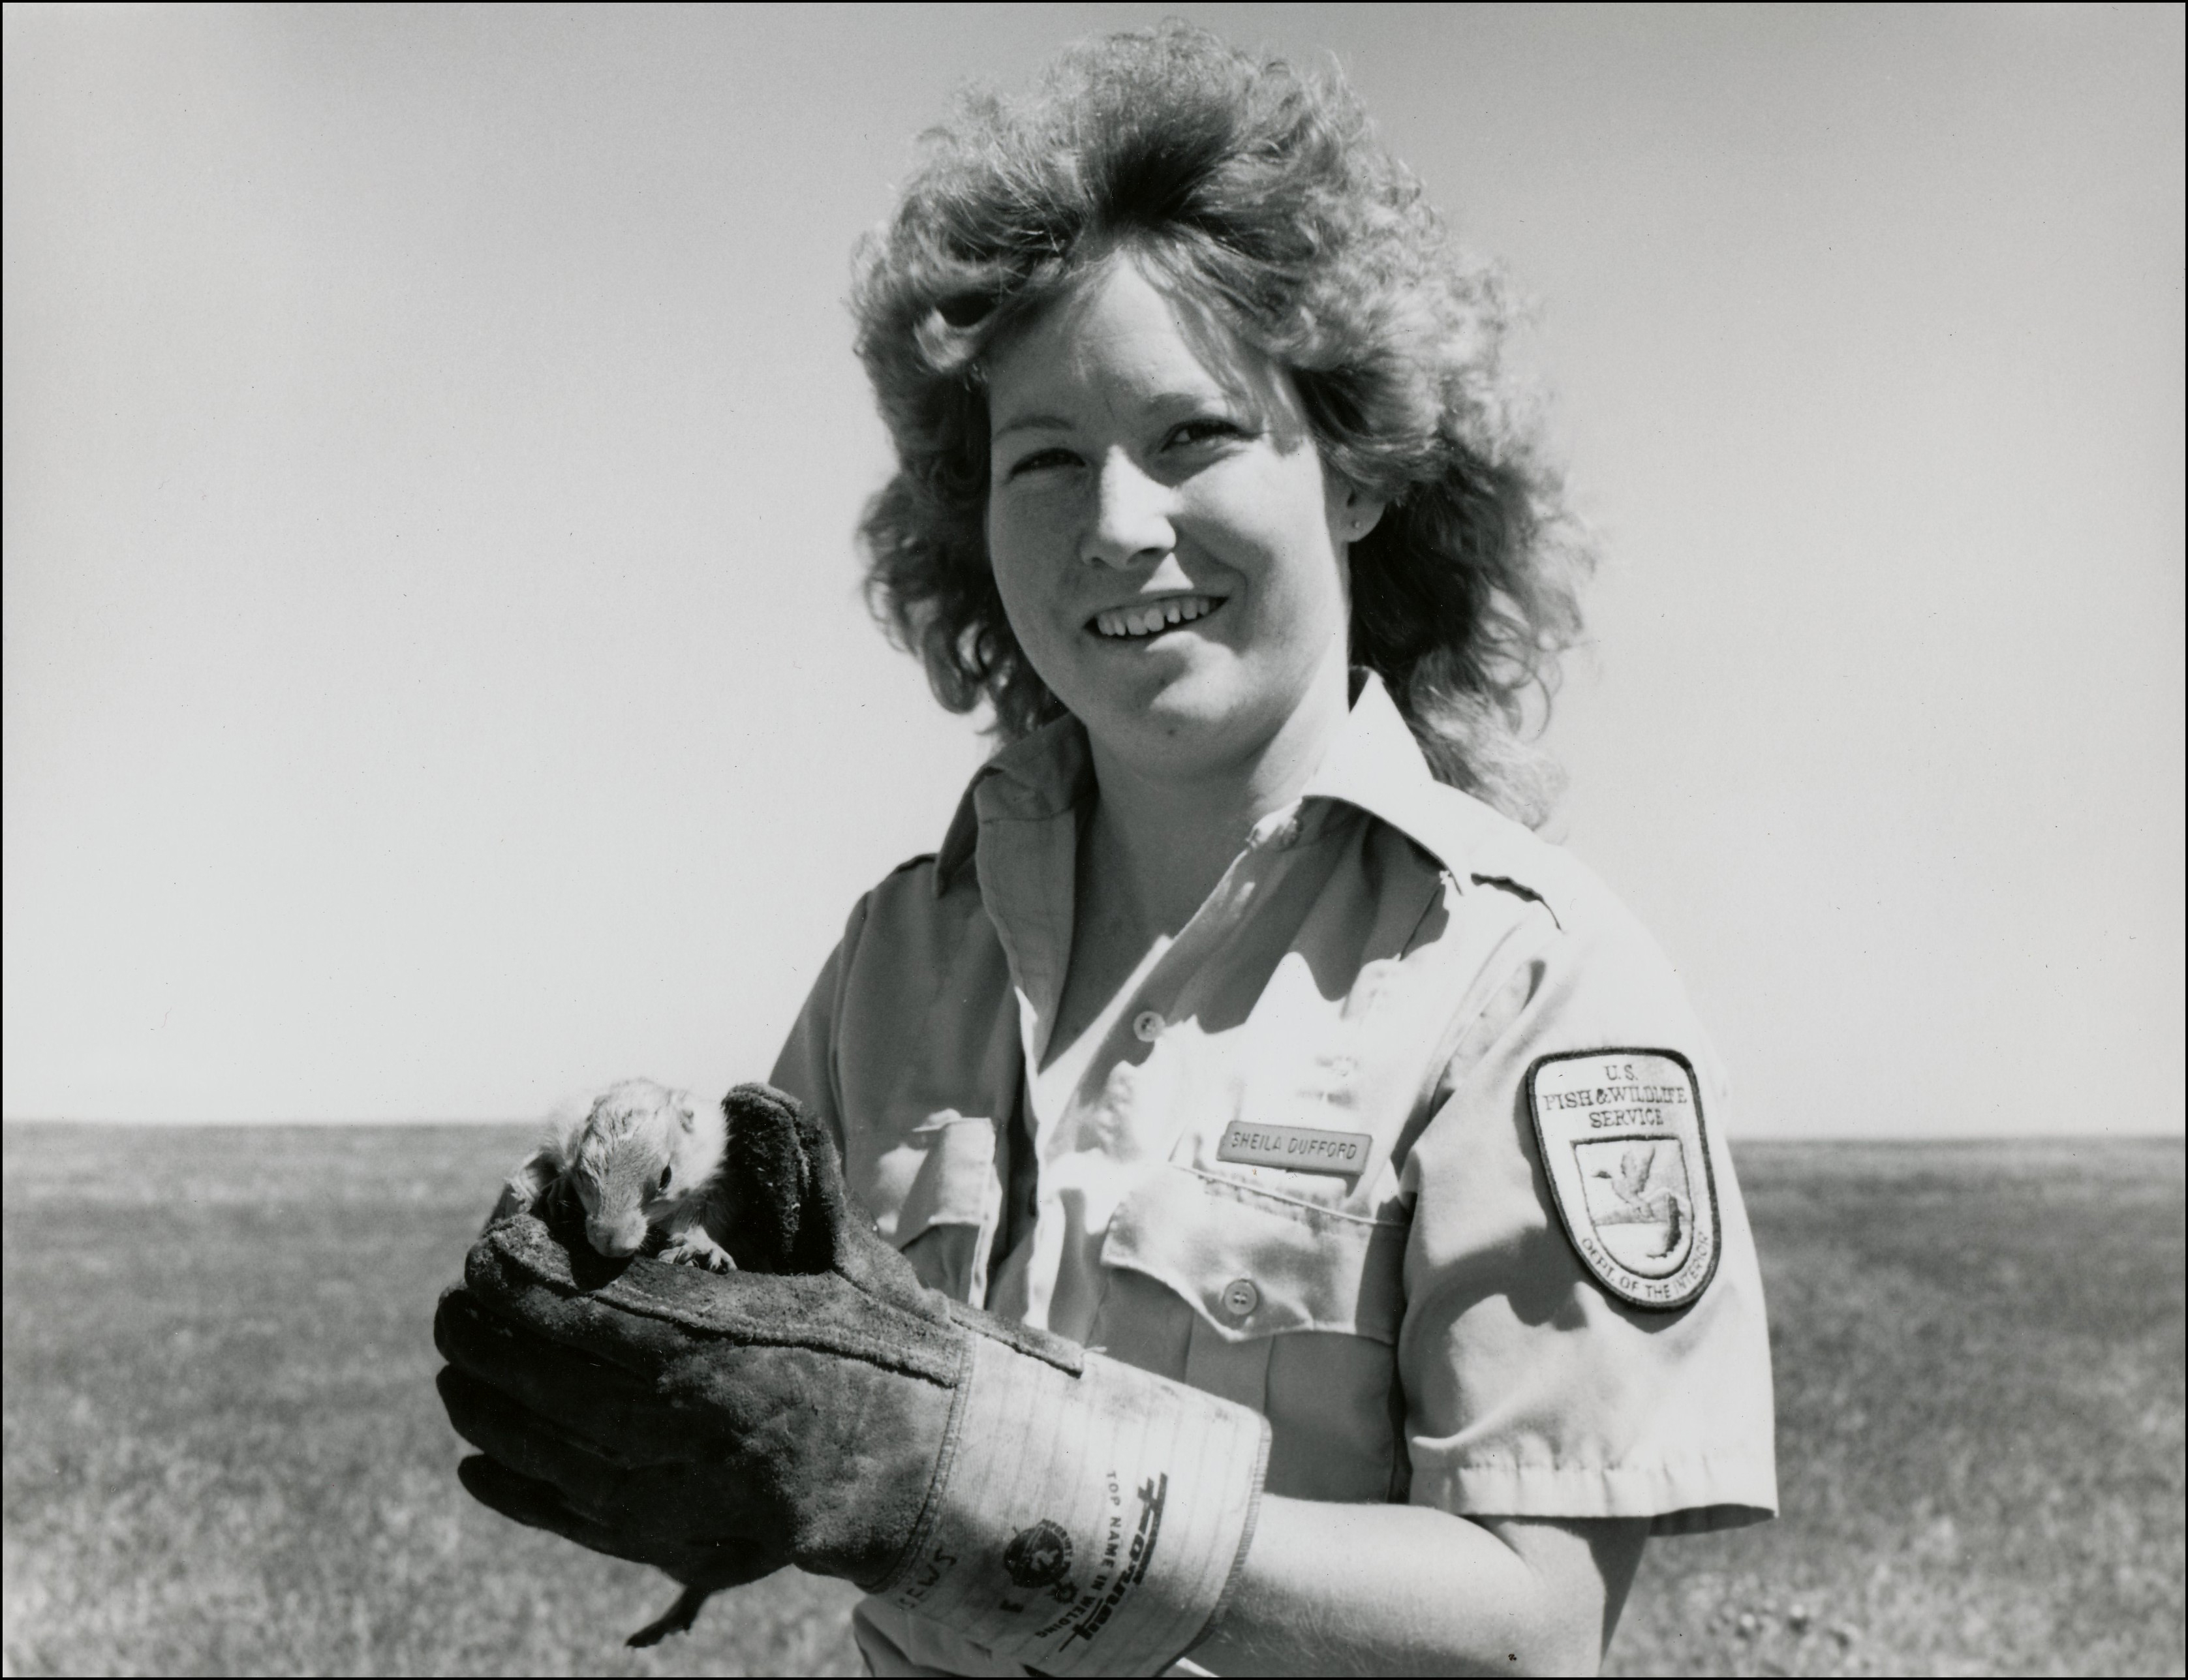 Woman in federal uniform with gloves on holding a prairie dog